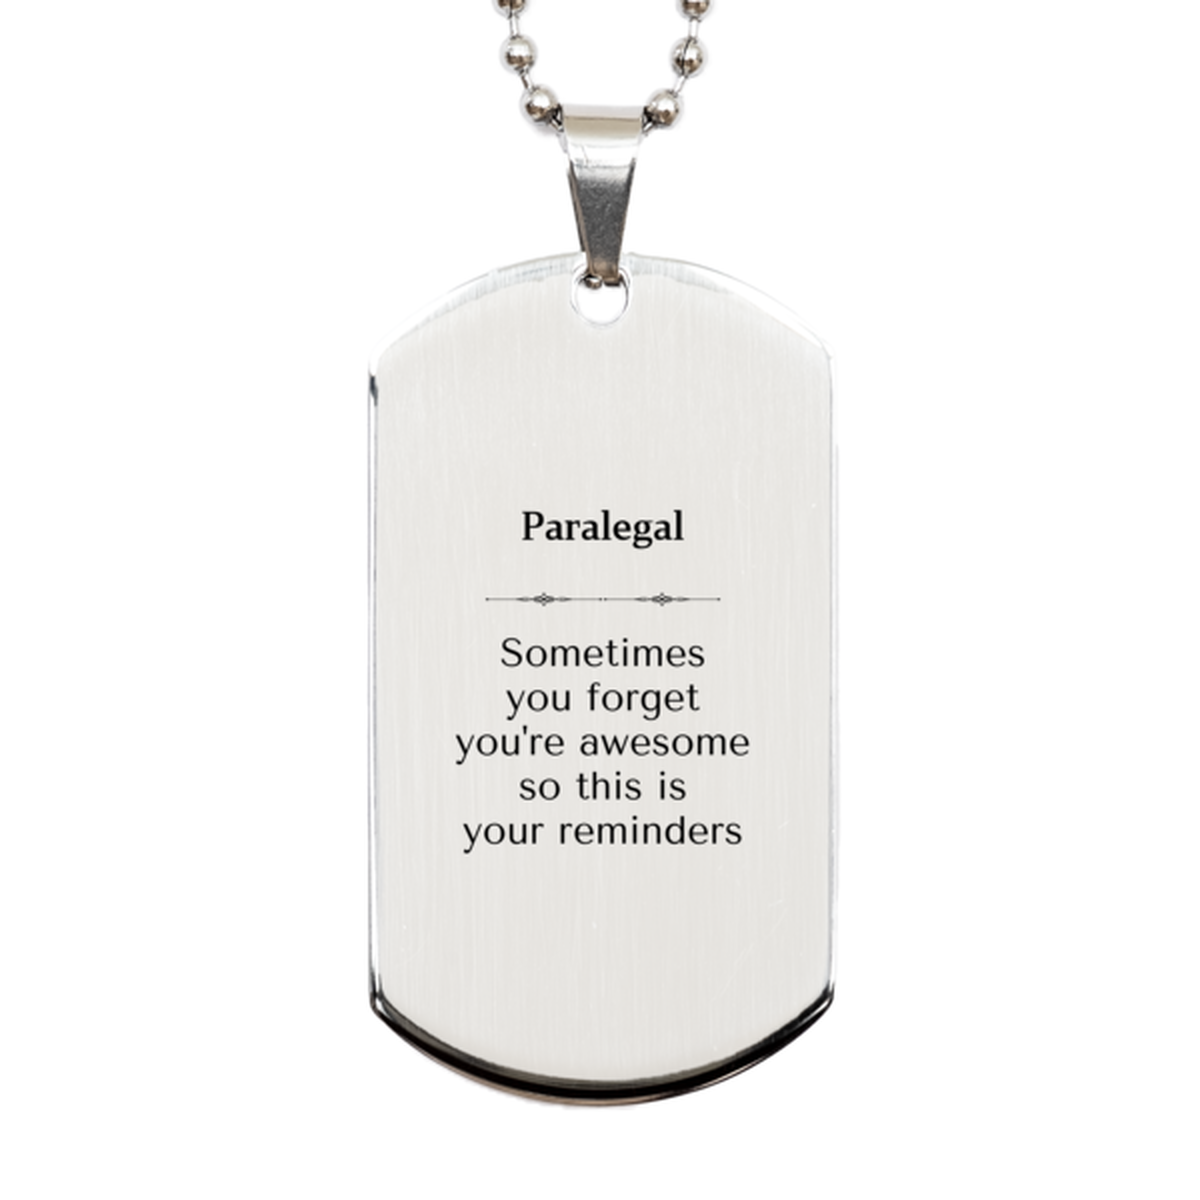 Sentimental Paralegal Silver Dog Tag, Paralegal Sometimes you forget you're awesome so this is your reminders, Graduation Christmas Birthday Gifts for Paralegal, Men, Women, Coworkers